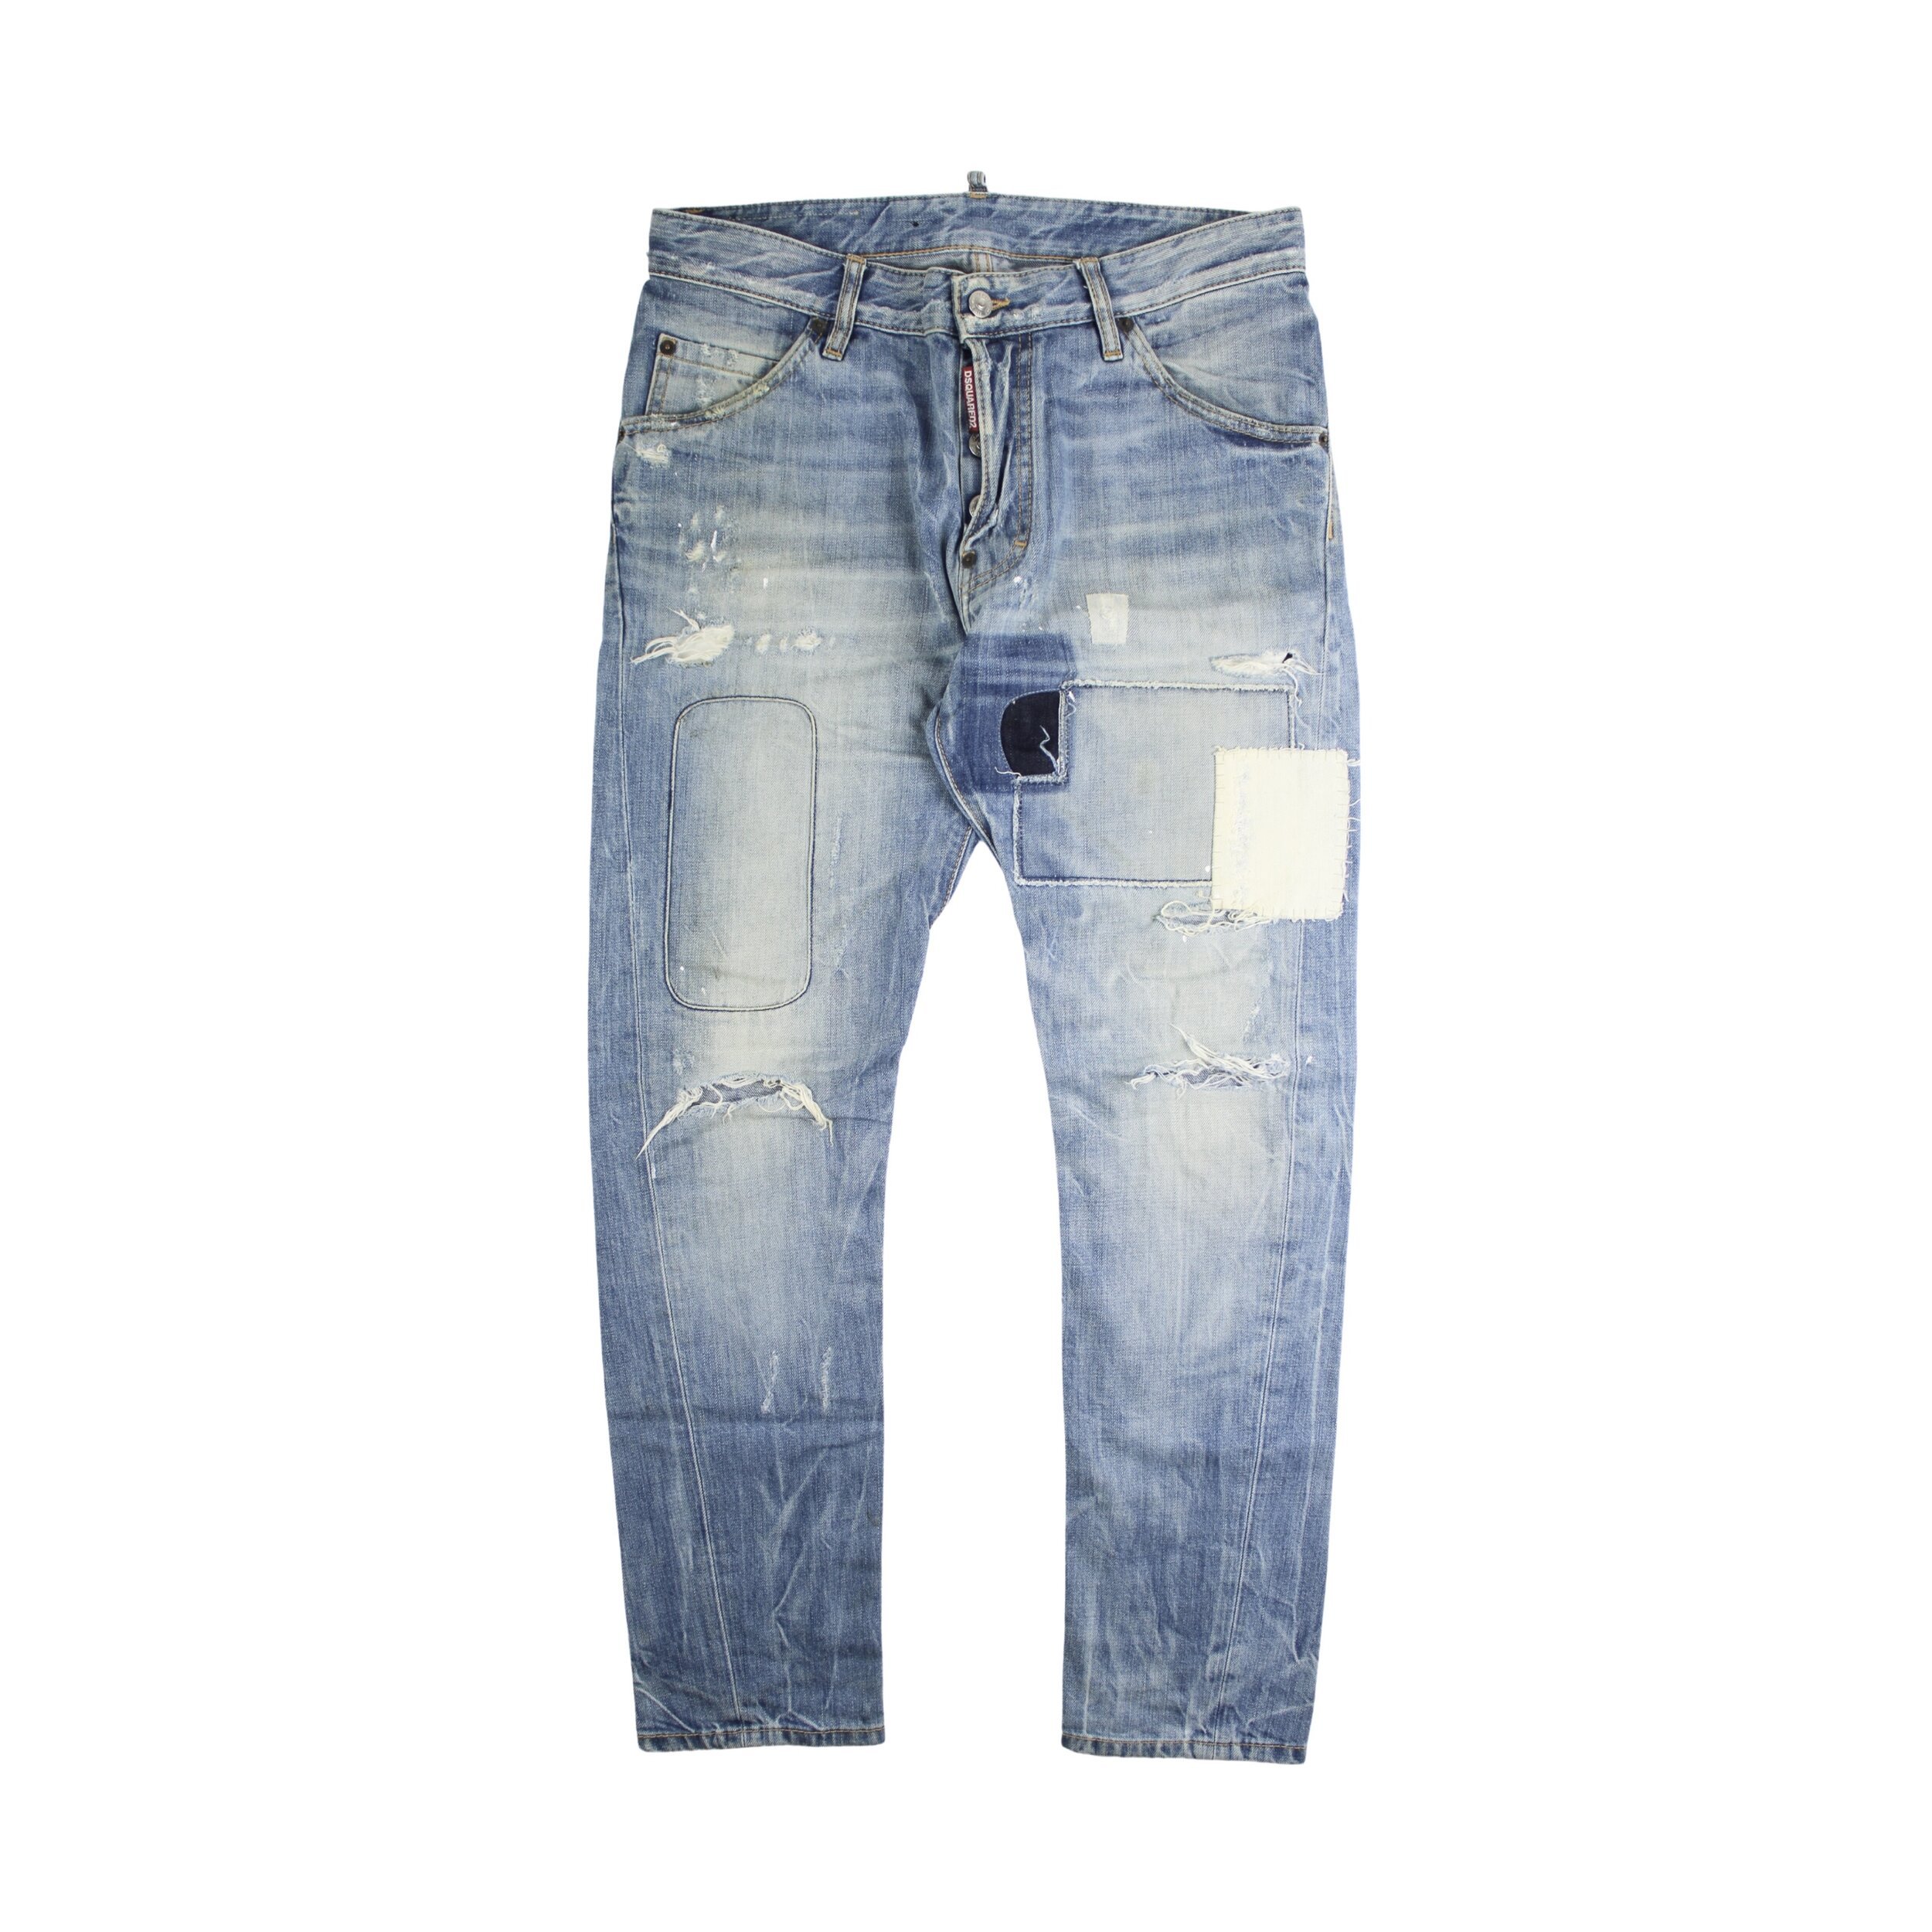 MARKED EU — DSQUARED2 Classic Kenny Jeans